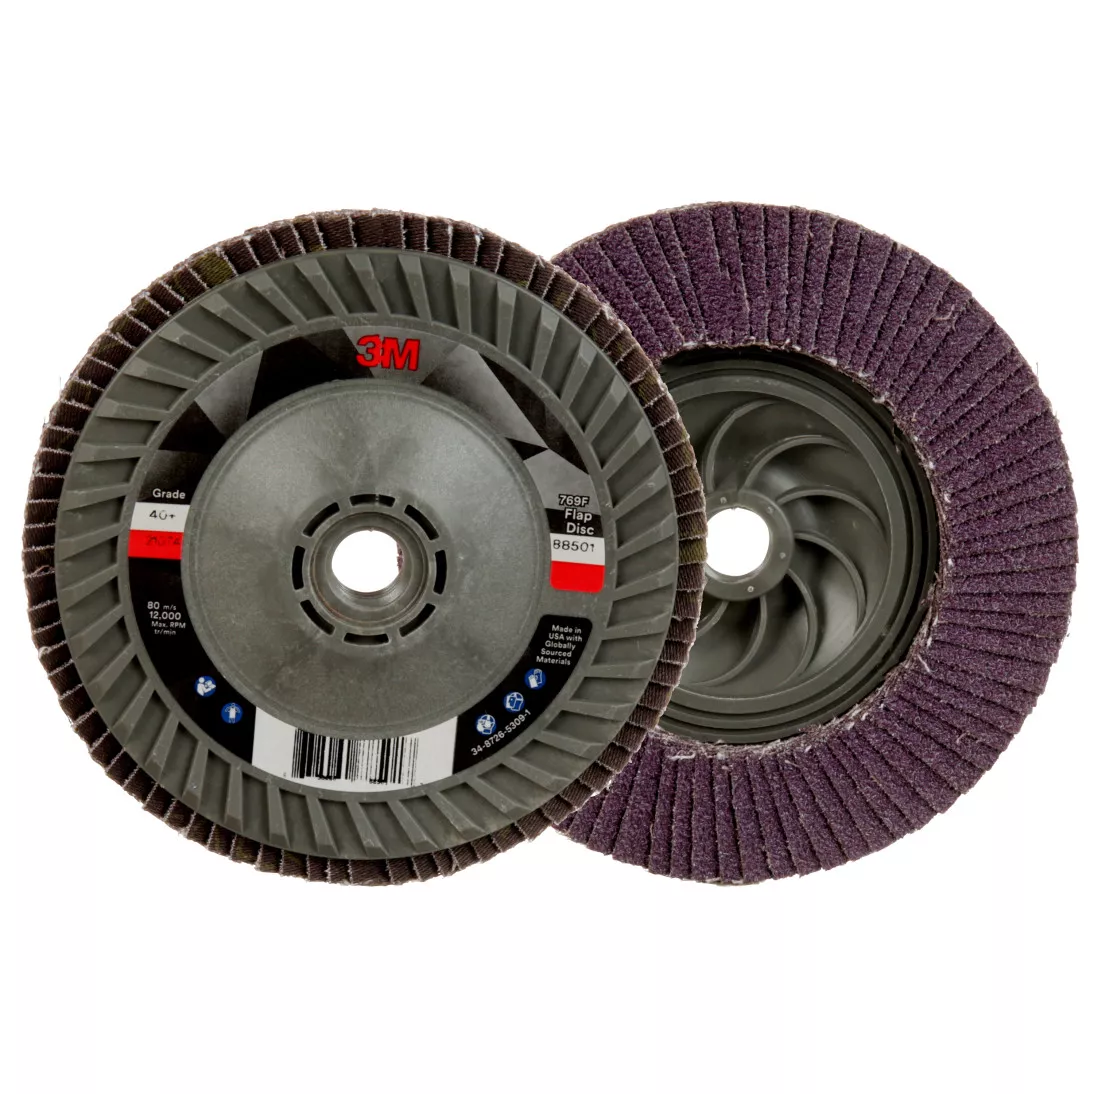 3M™ Flap Disc 769F, 40+, Quick Change, Type 29, 5 in x 5/8 in-11, 10
ea/Case